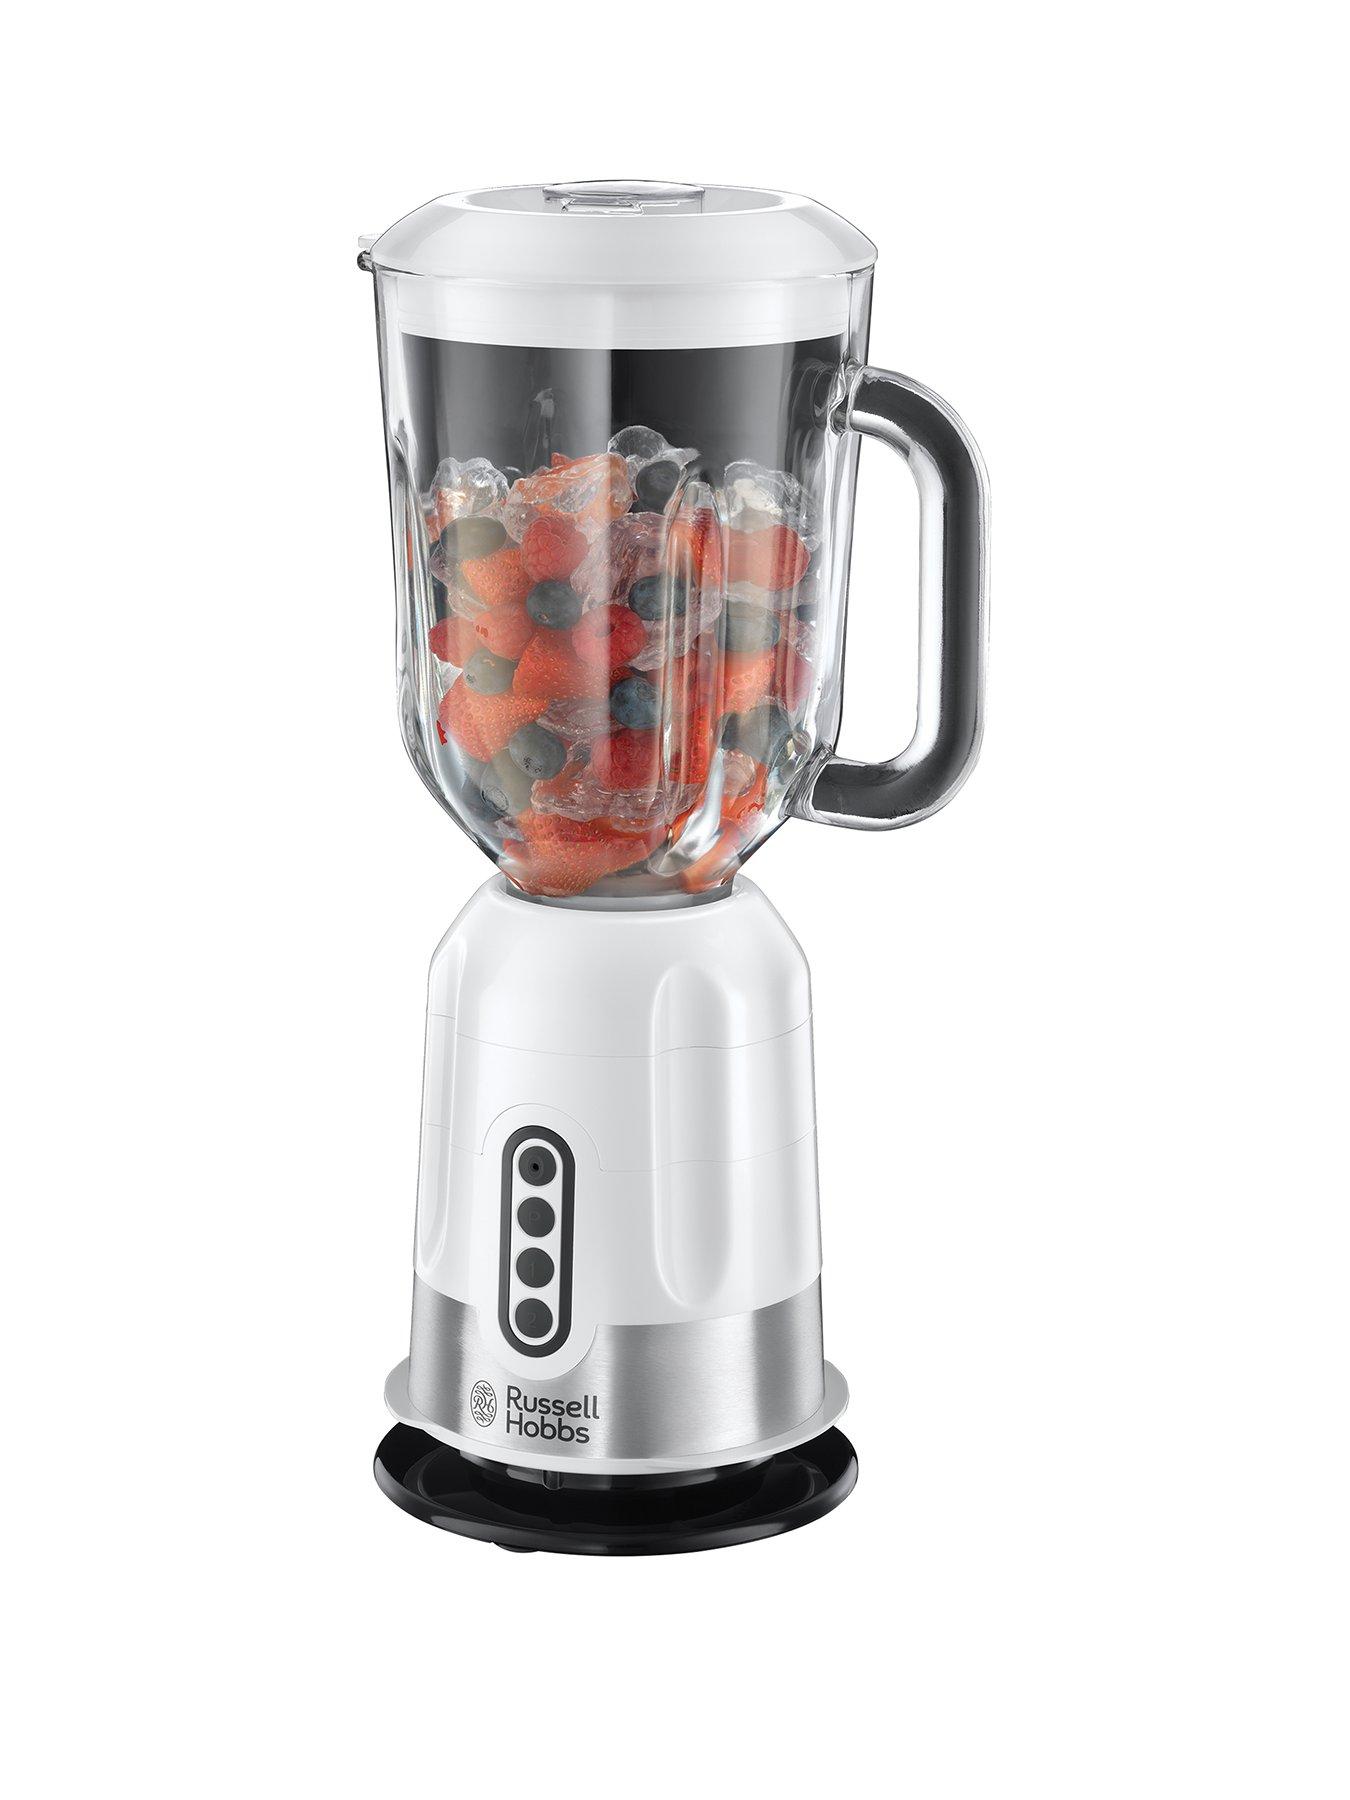 Russell Hobbs 22990 Easy Prep Blender With Free Extended Guarantee* Review thumbnail